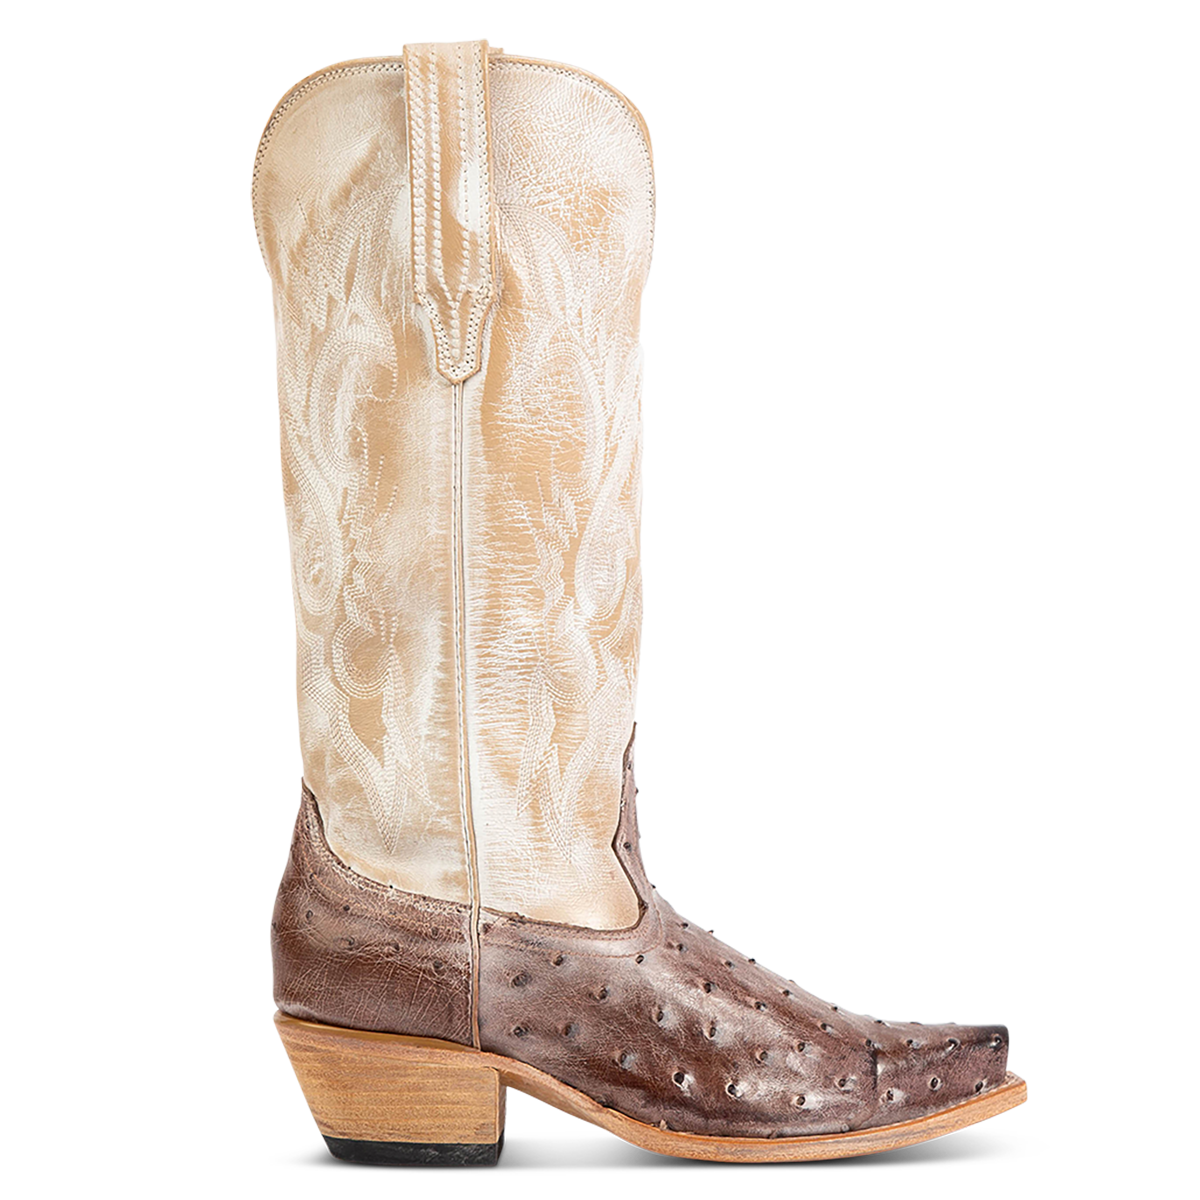 FREEBIRD women's Woodland wine ostrich leather cowboy boot with stitch detailing and snip toe construction